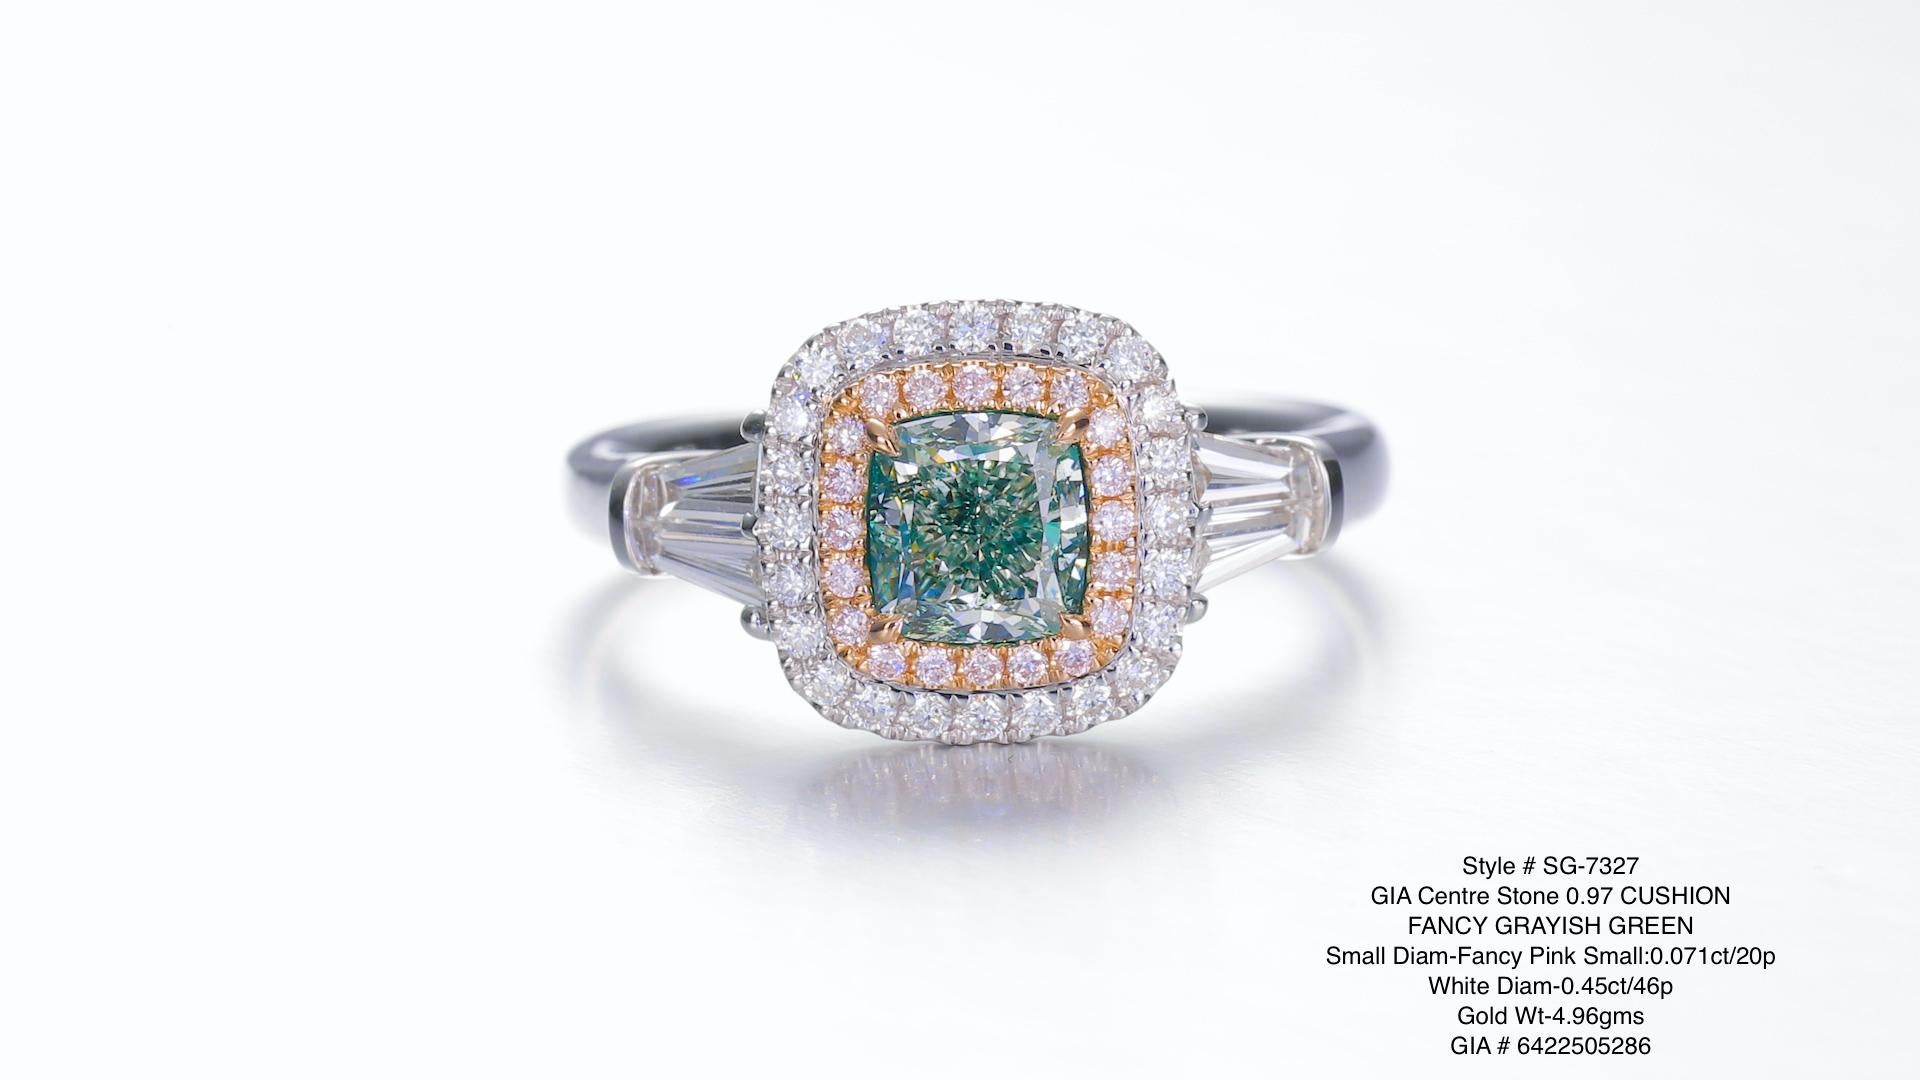 0.97ct fancy Grayish Green Cushion cut diamong studded on 18KT gold with round pink color diamonds in the halo and white diamonds on the side.

A captivating piece of artistry, this 0.97ct cushion-cut Fancy Grayish Green diamond ring is a true